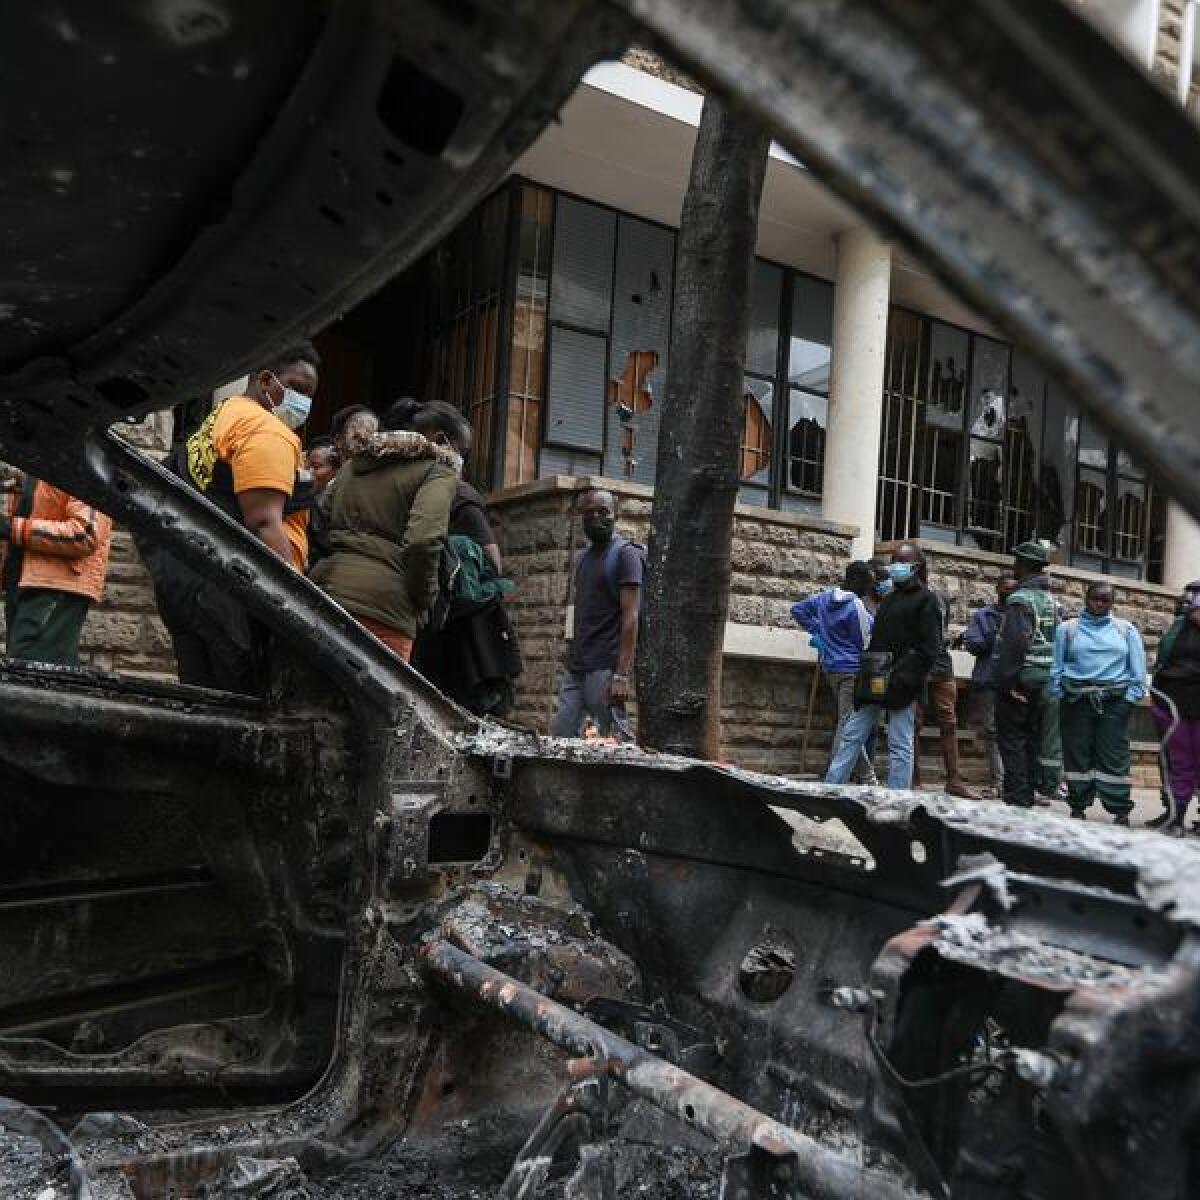 People walk past a car torched in Nairobi